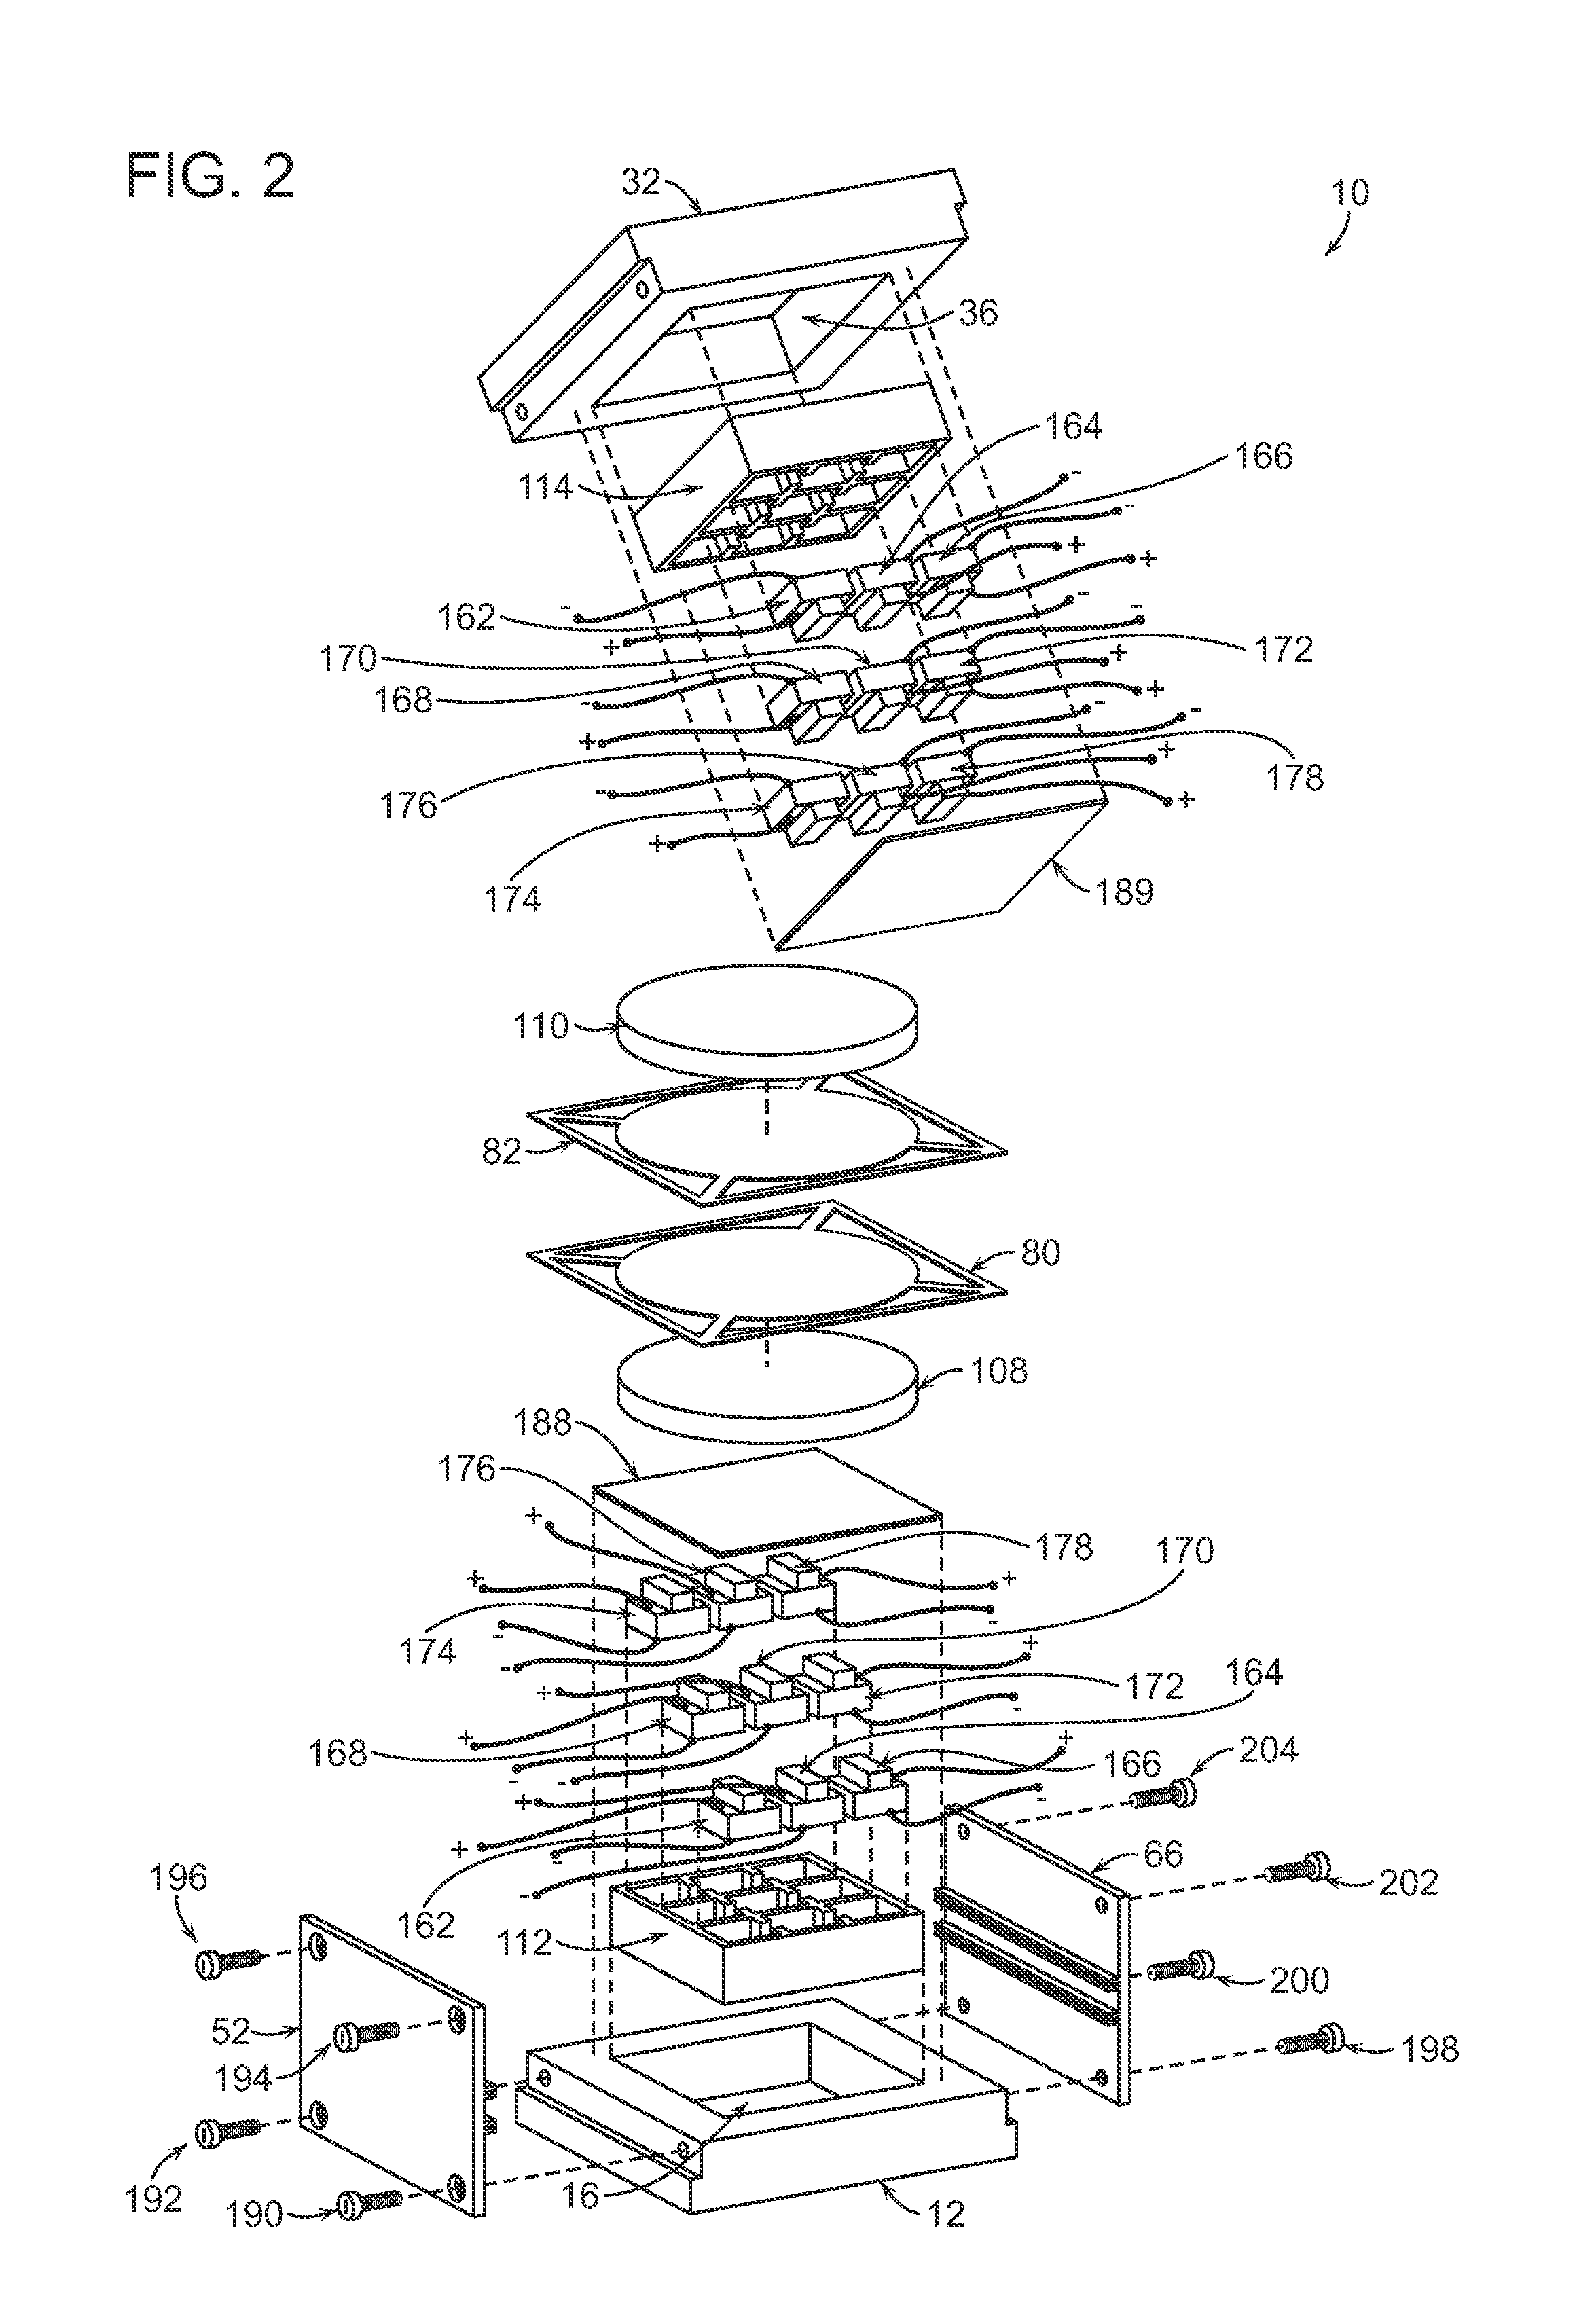 Device and Method For Tuning Mechanical and Electromagnetic Natural Frequencies of an Energy Harvester